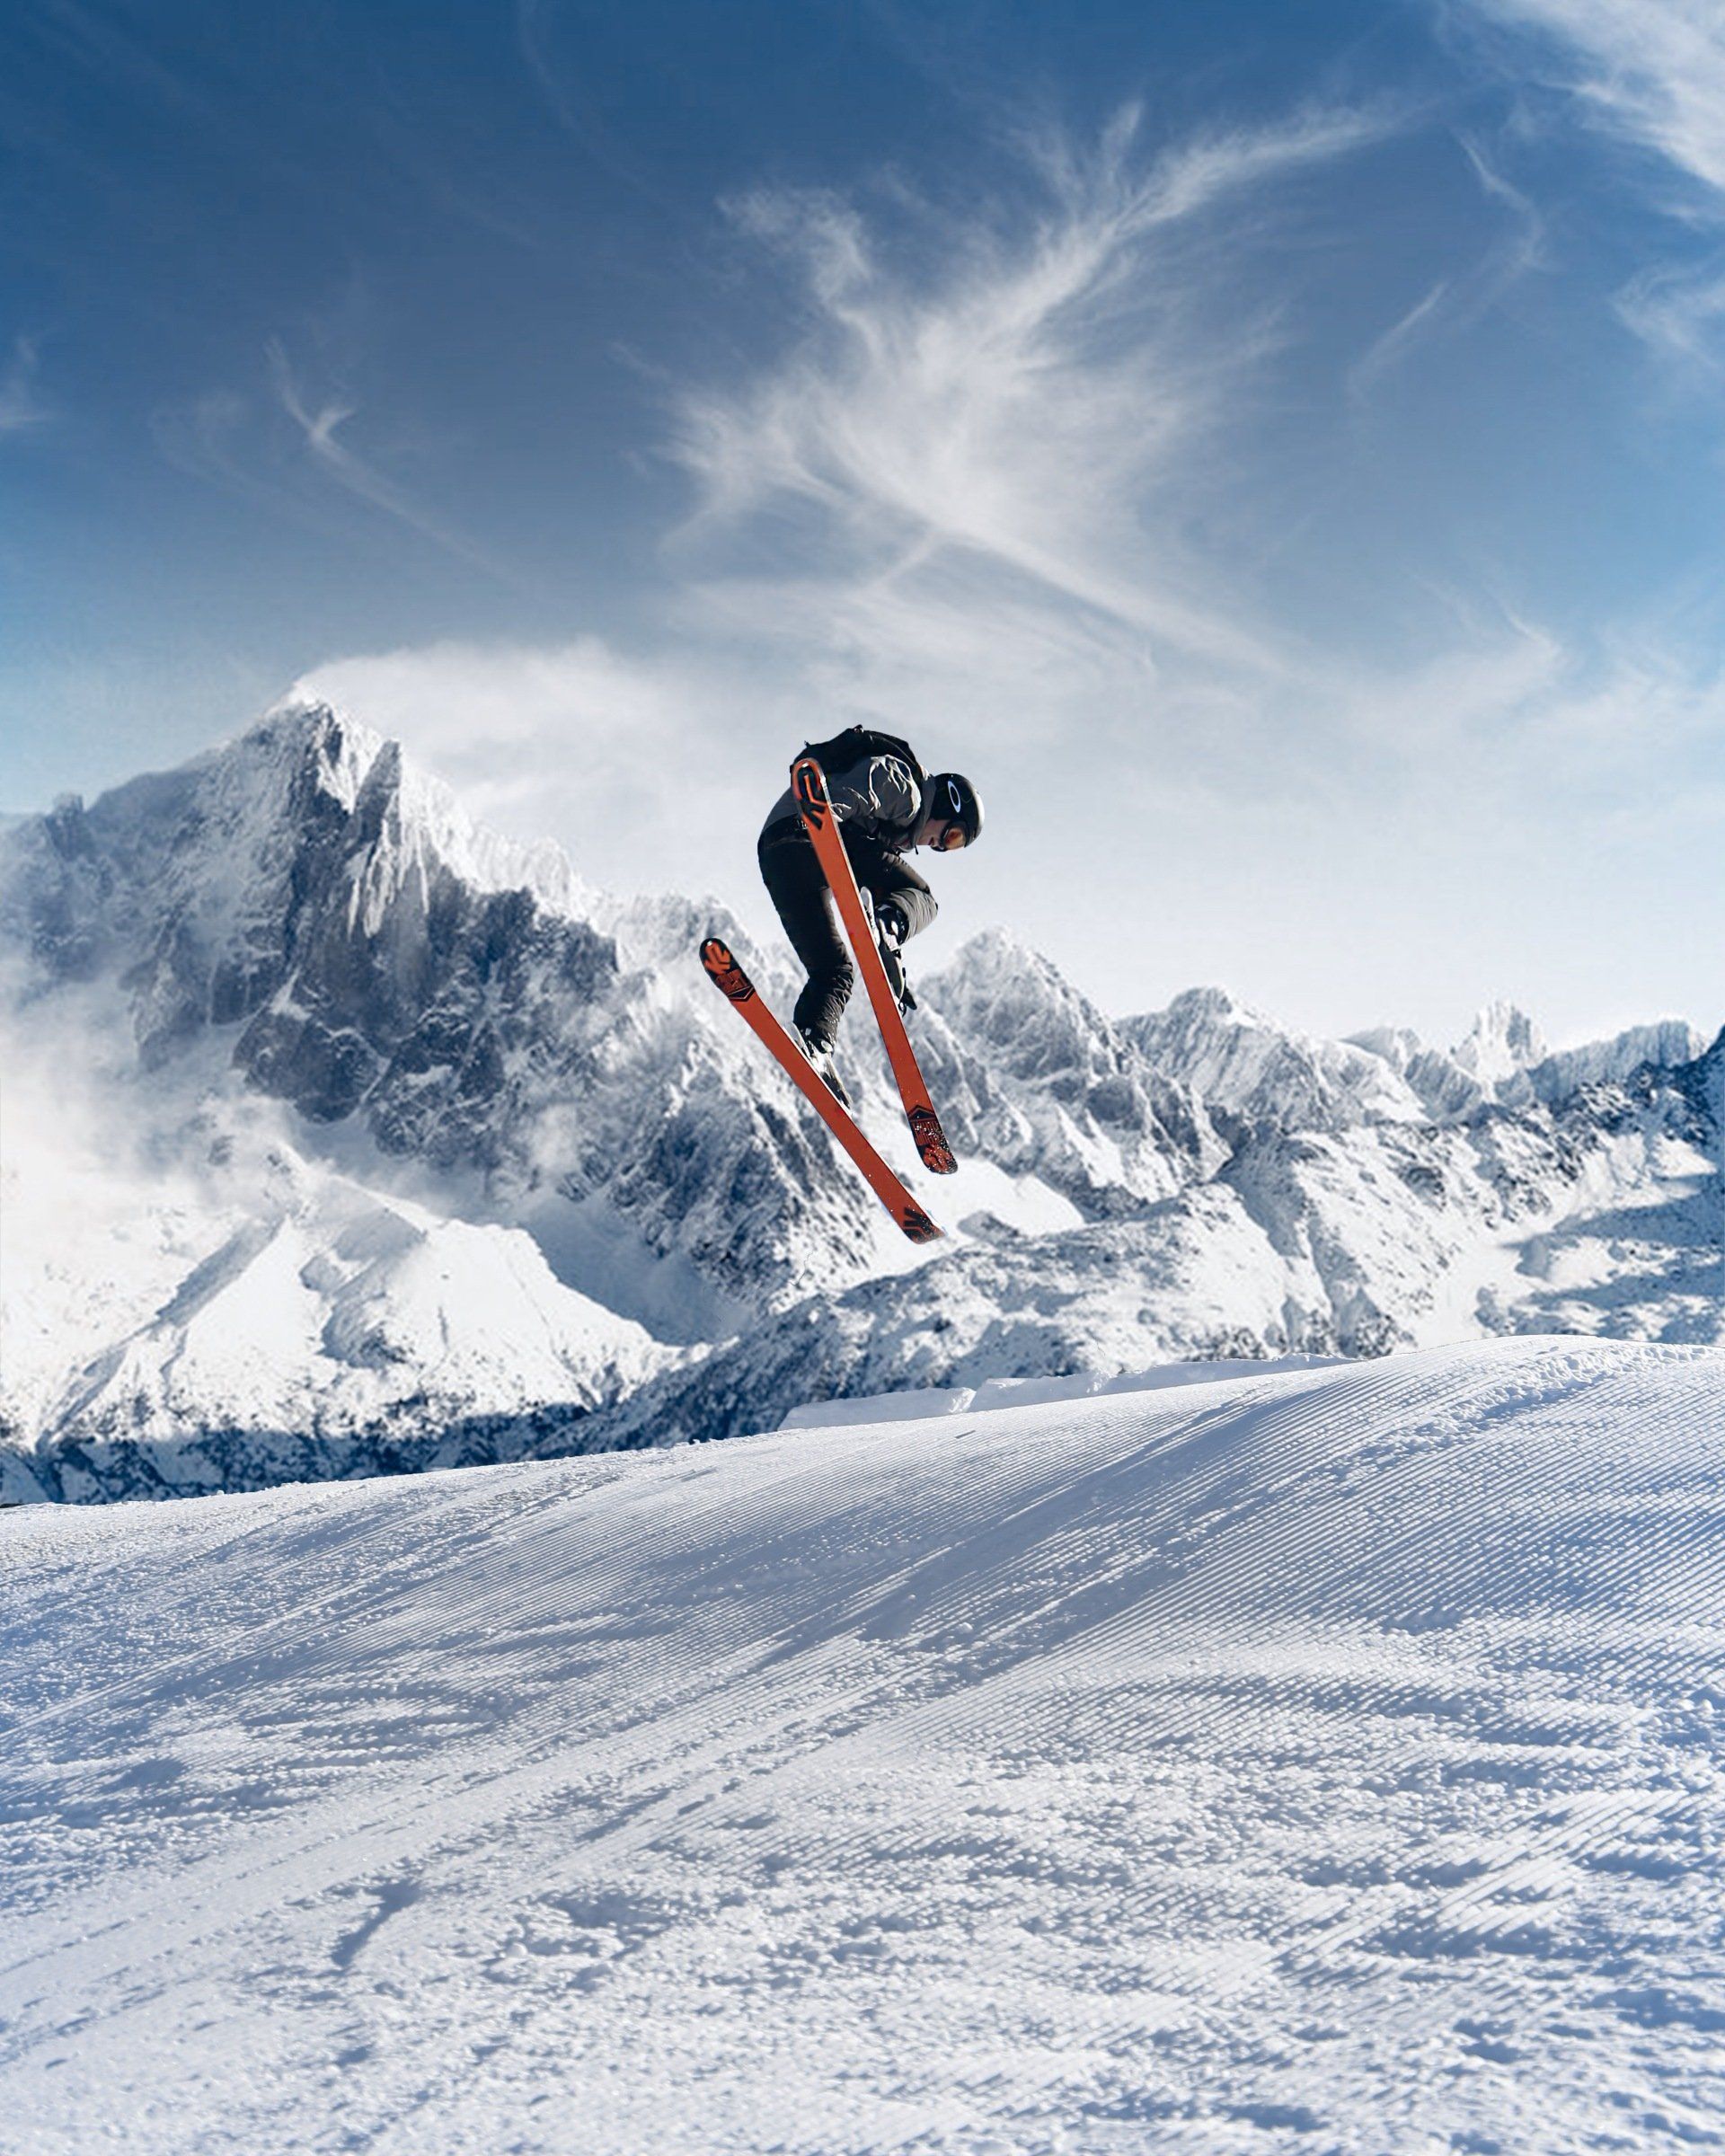 A person is jumping in the air while skiing in the snow